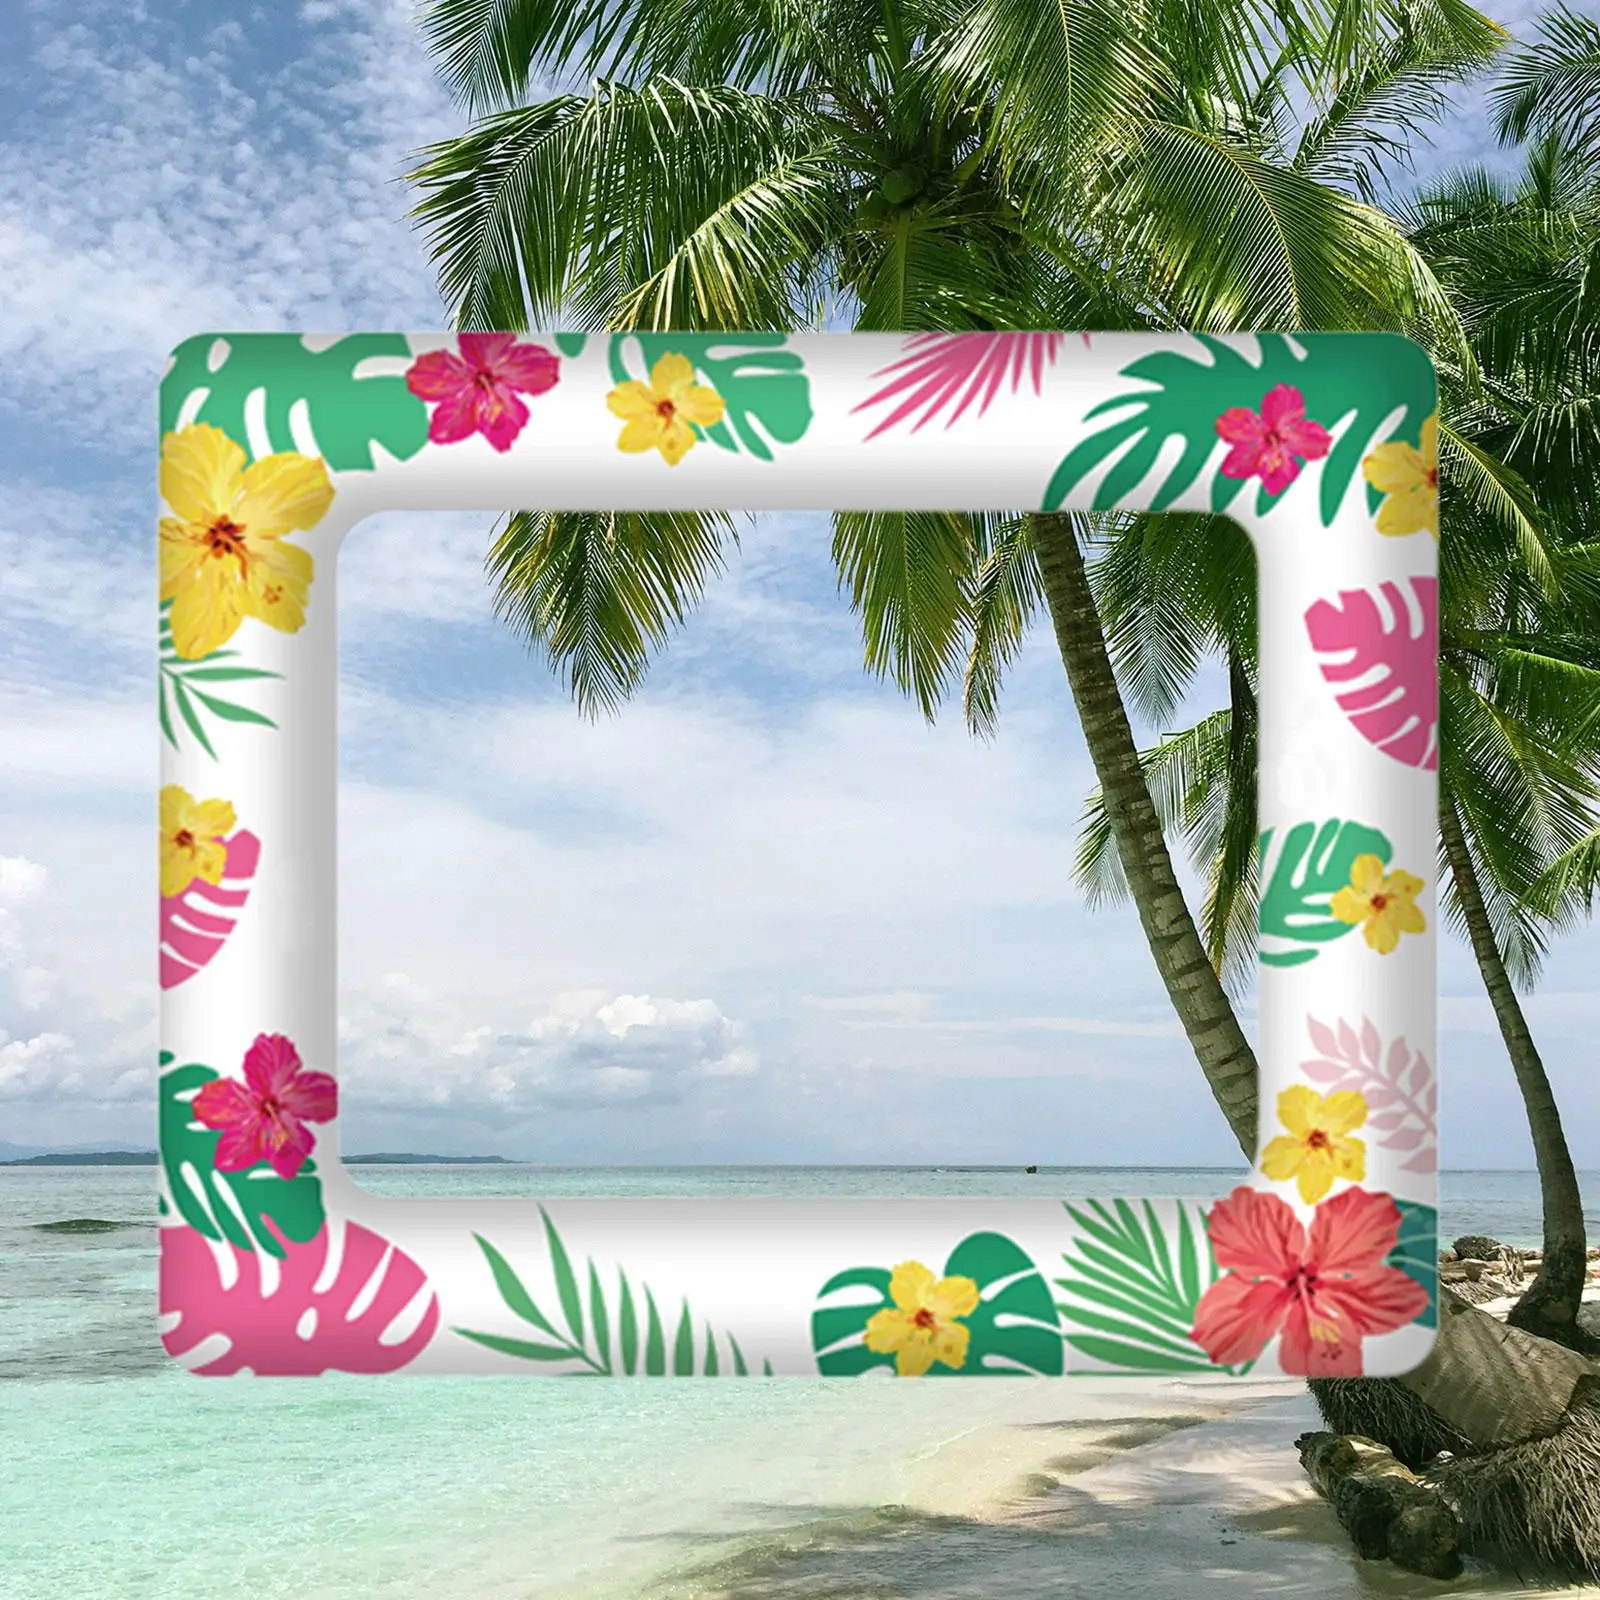 Inflatable Photo Frame Multipurpose Summer Photo Booth Frame Selfie Photo Frame for Friends Carnival Family Wedding Graduation